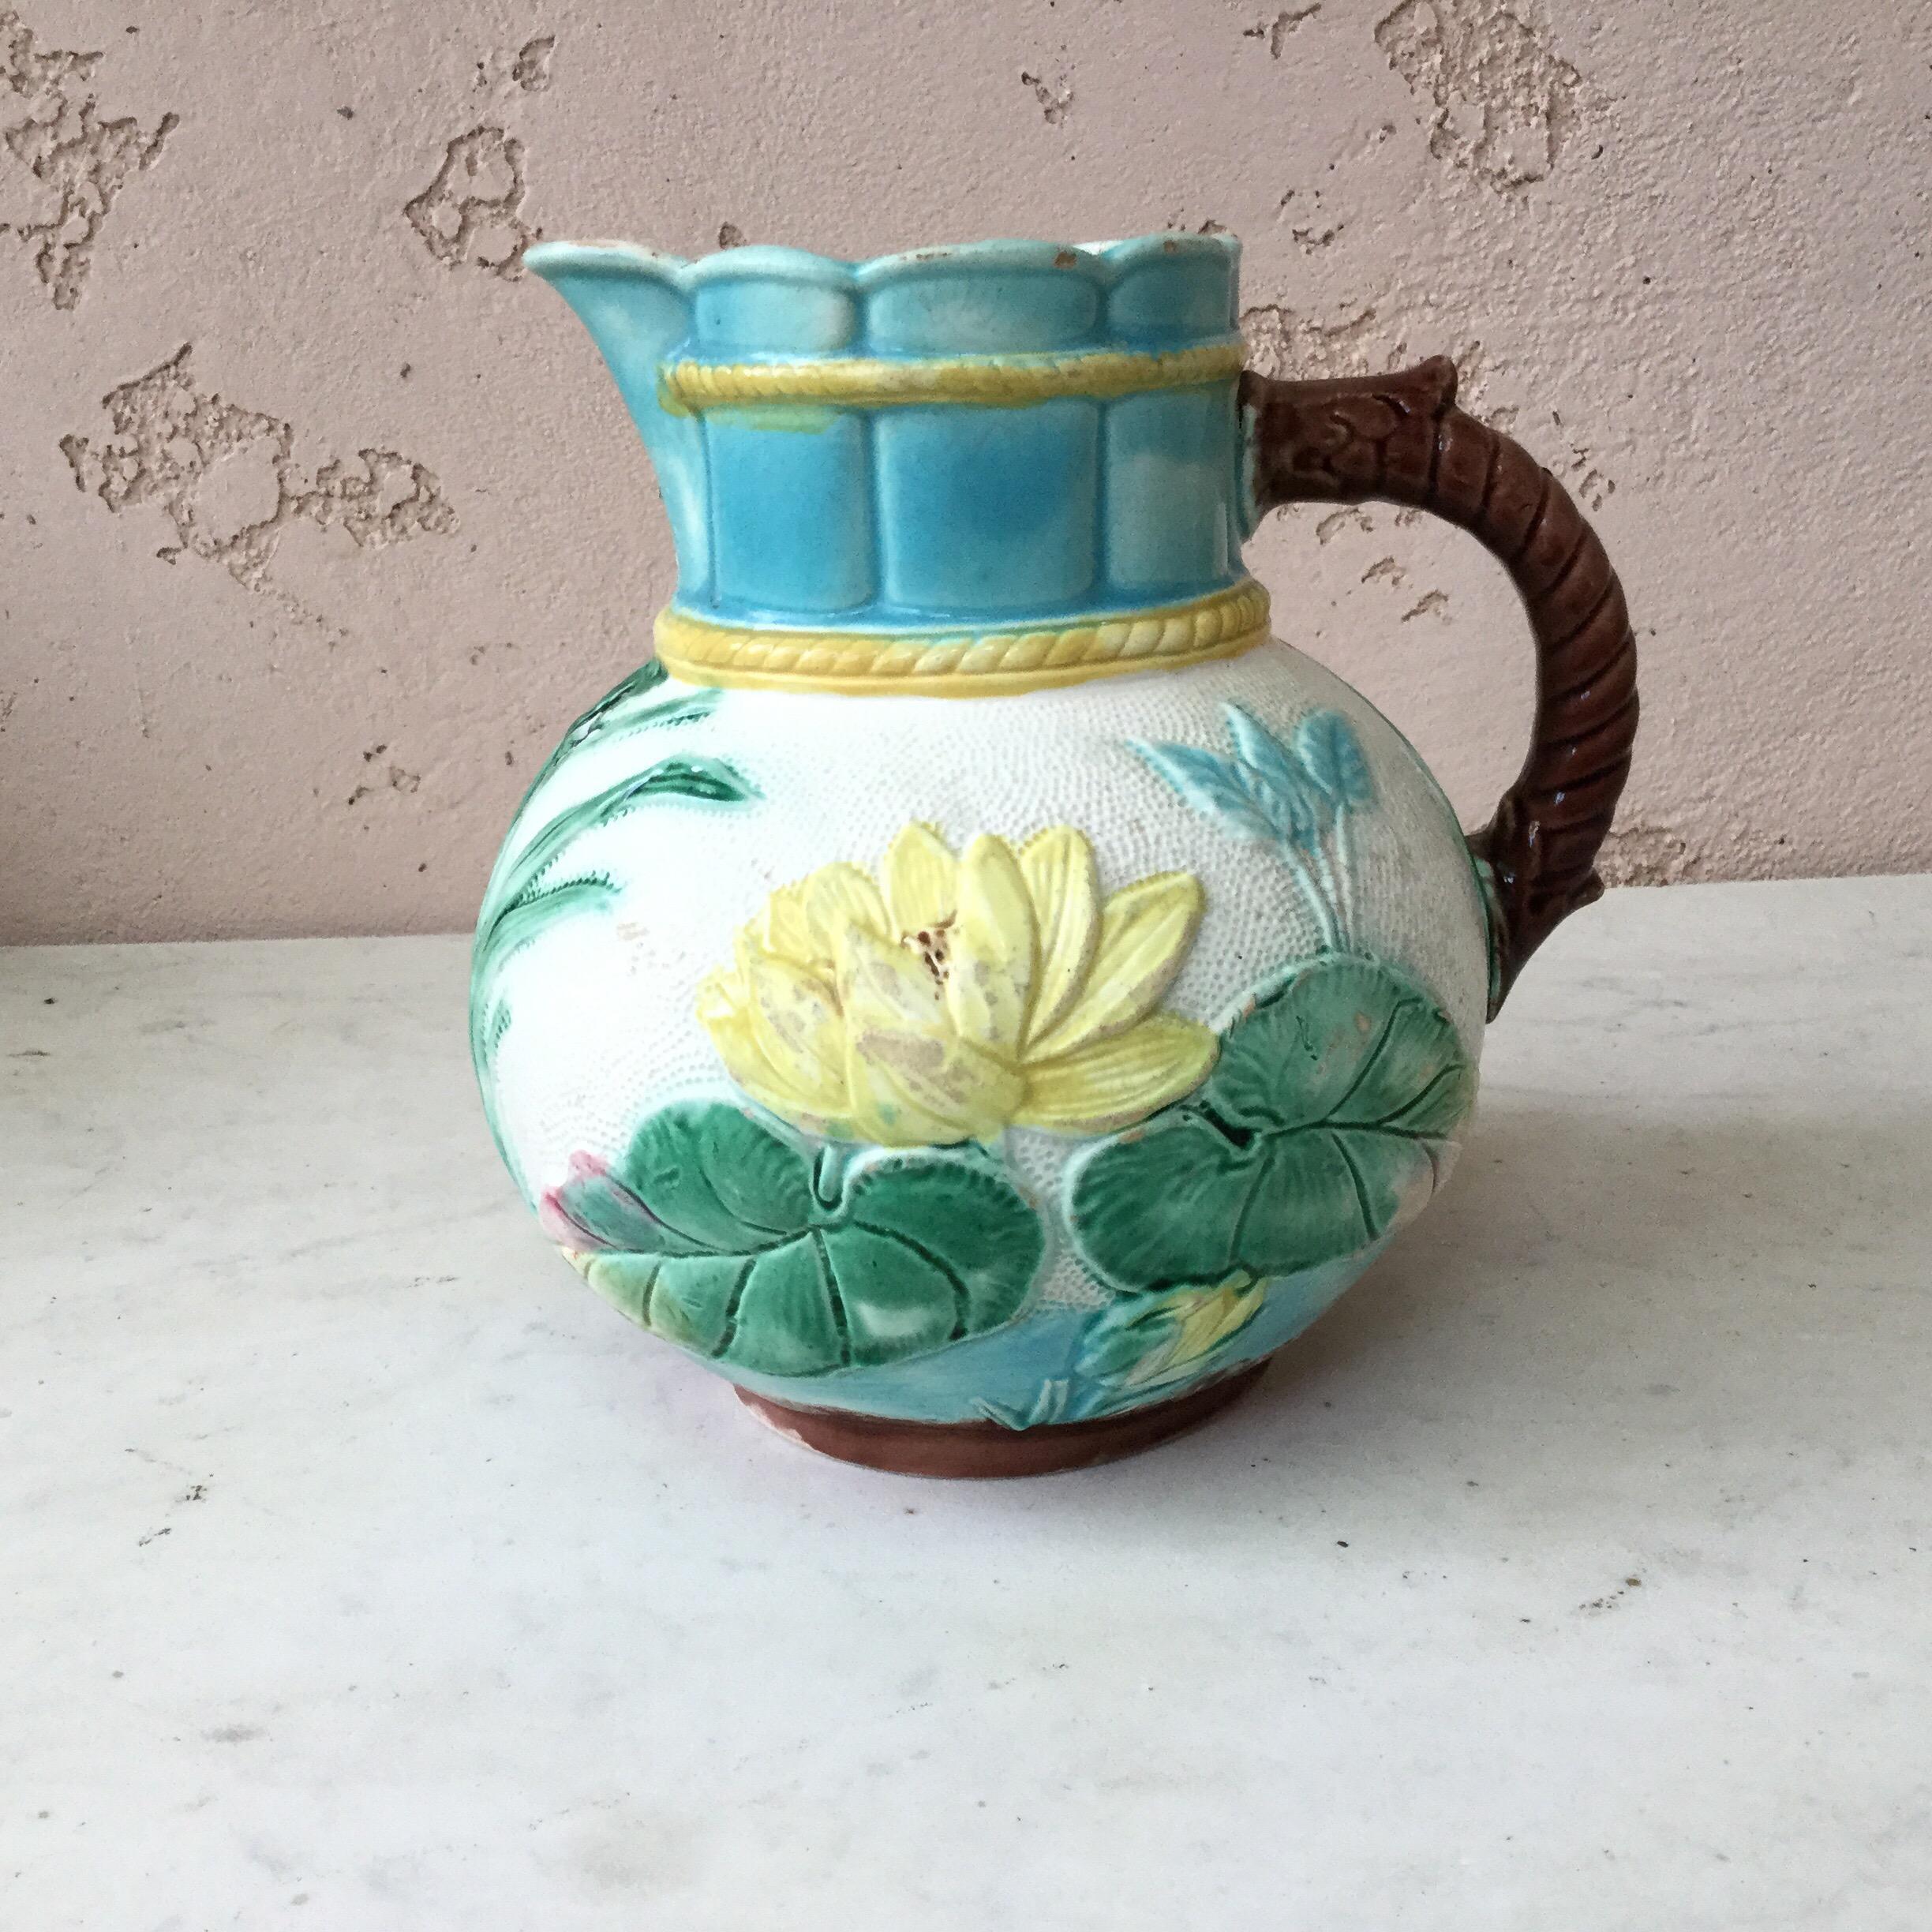 19th century majolica pitcher with water lily, circa 1890.
Victorian period.